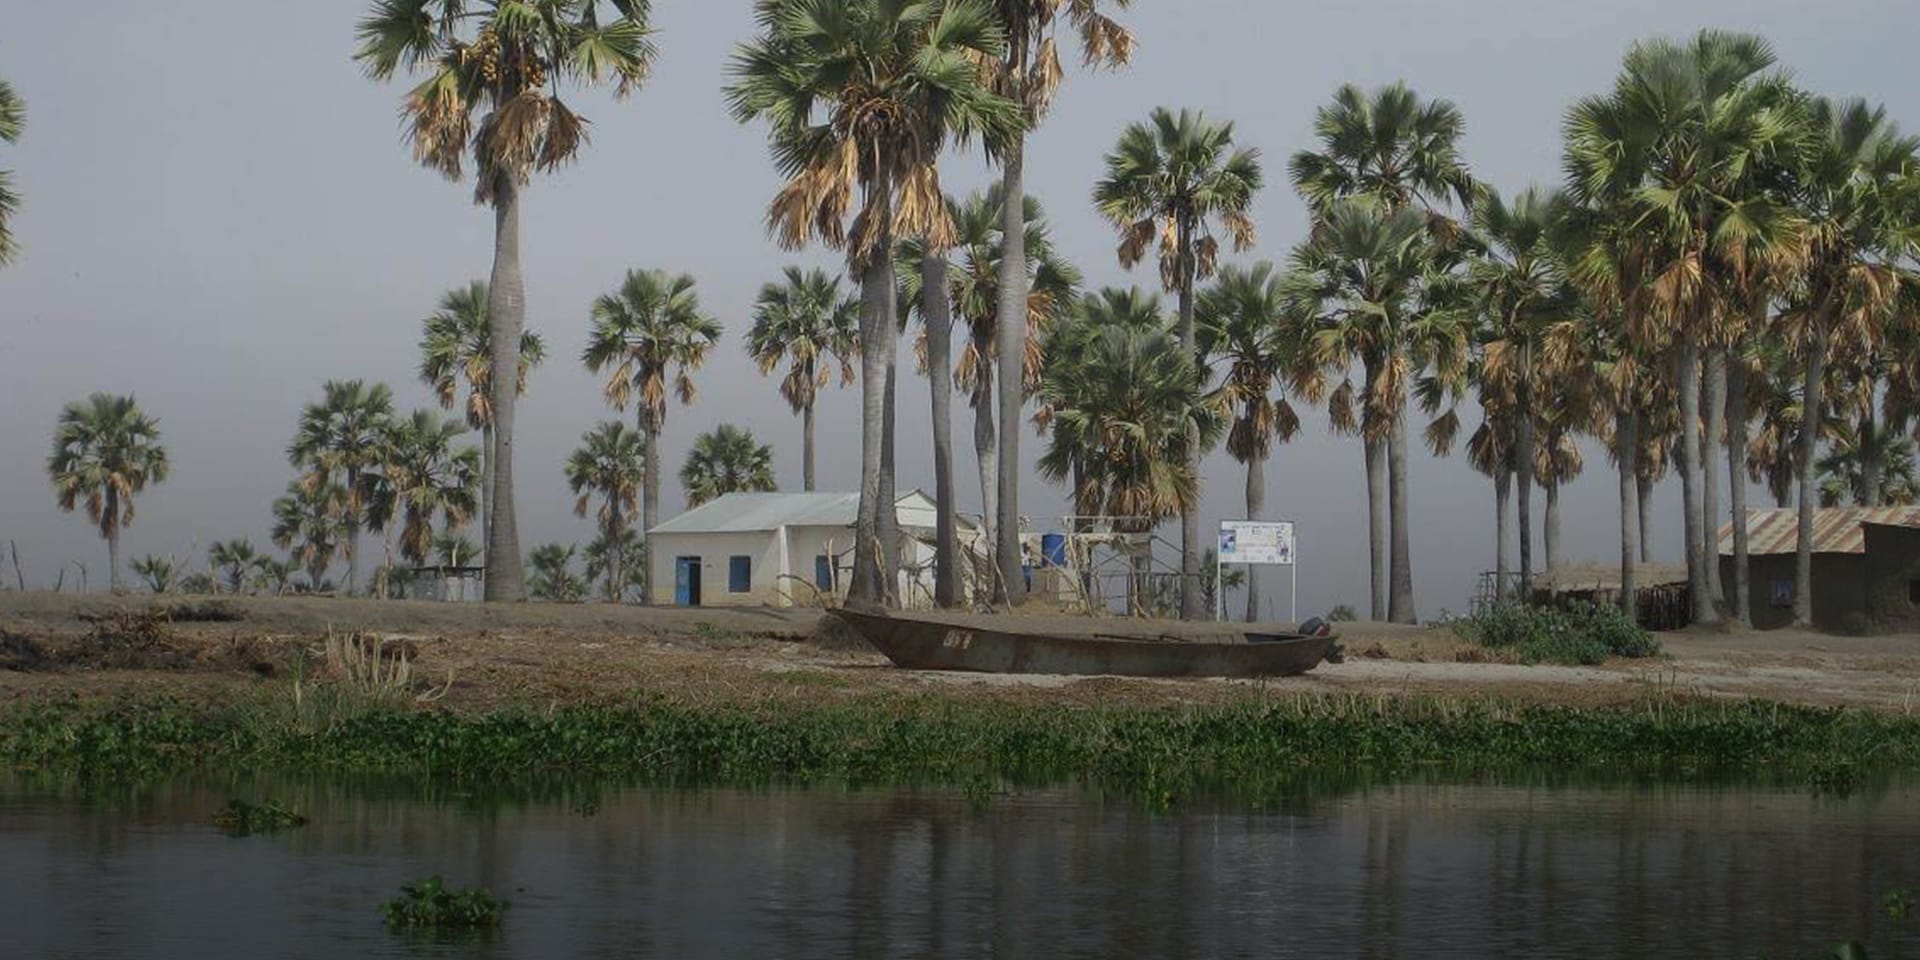 Image of a lake with a boat on the shore. A small white building can be seen in the distance surrounded by tall palm trees.